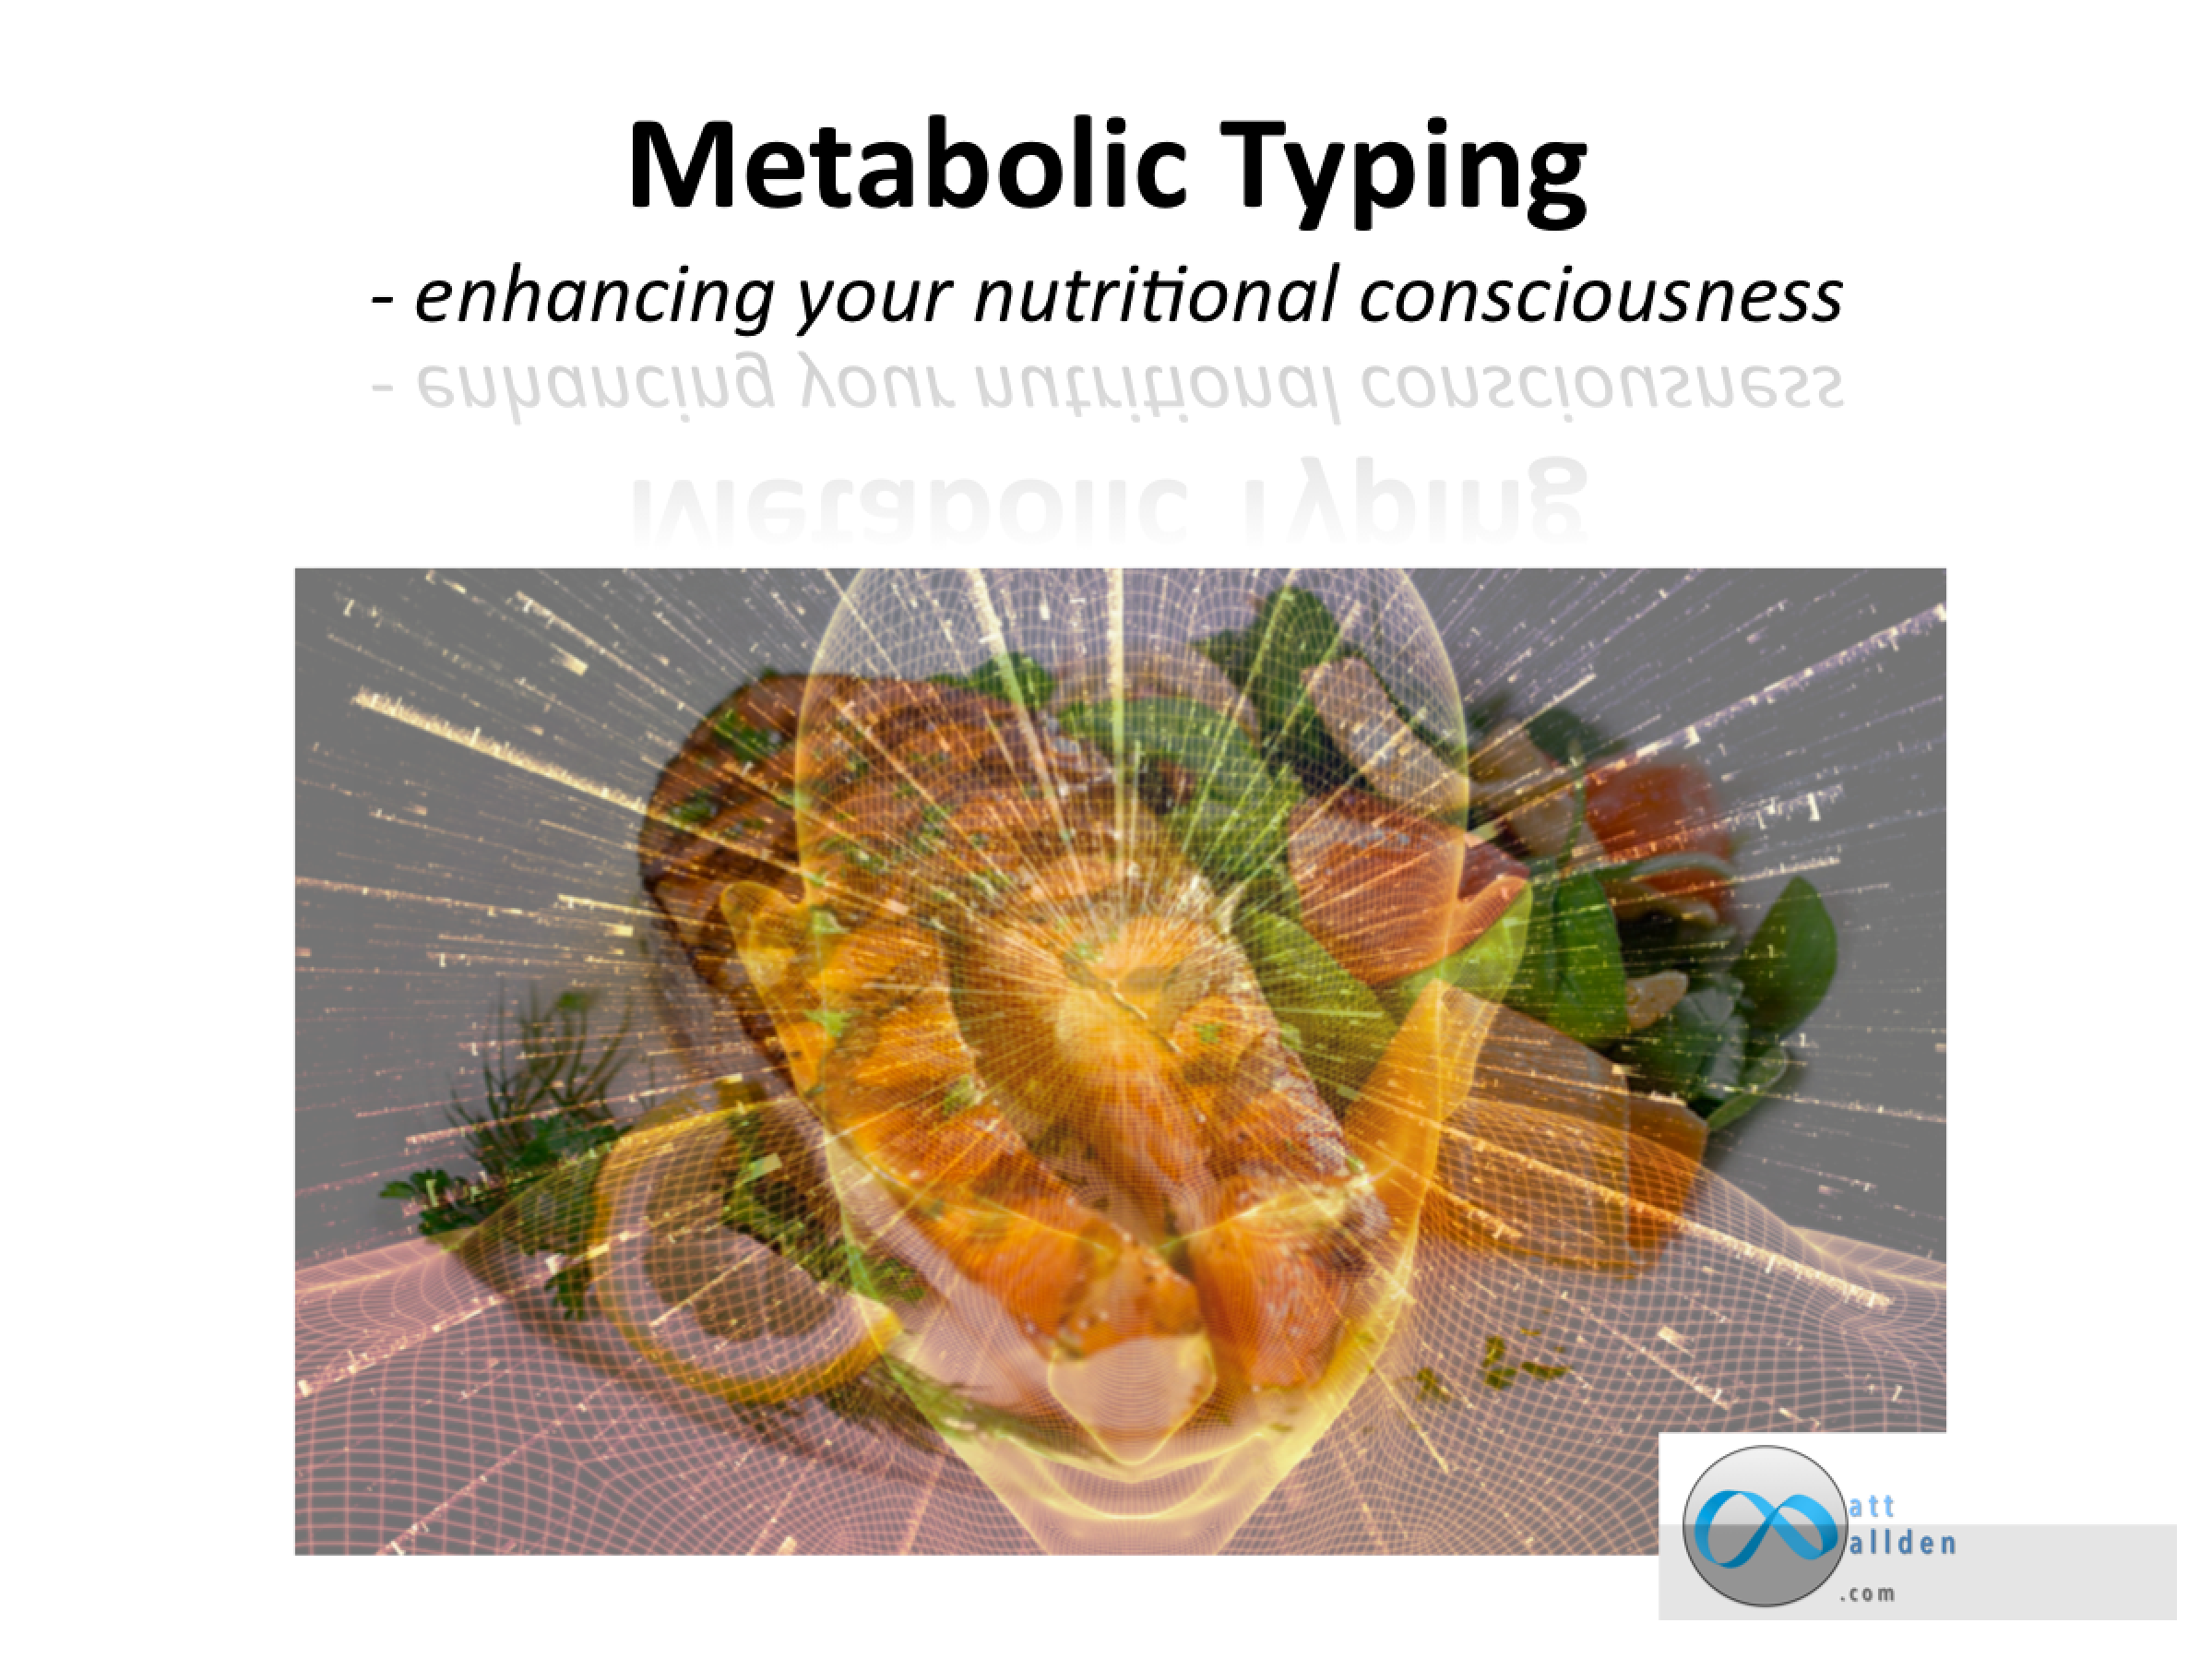 Metabolic Typing Test, Report & Video Consult